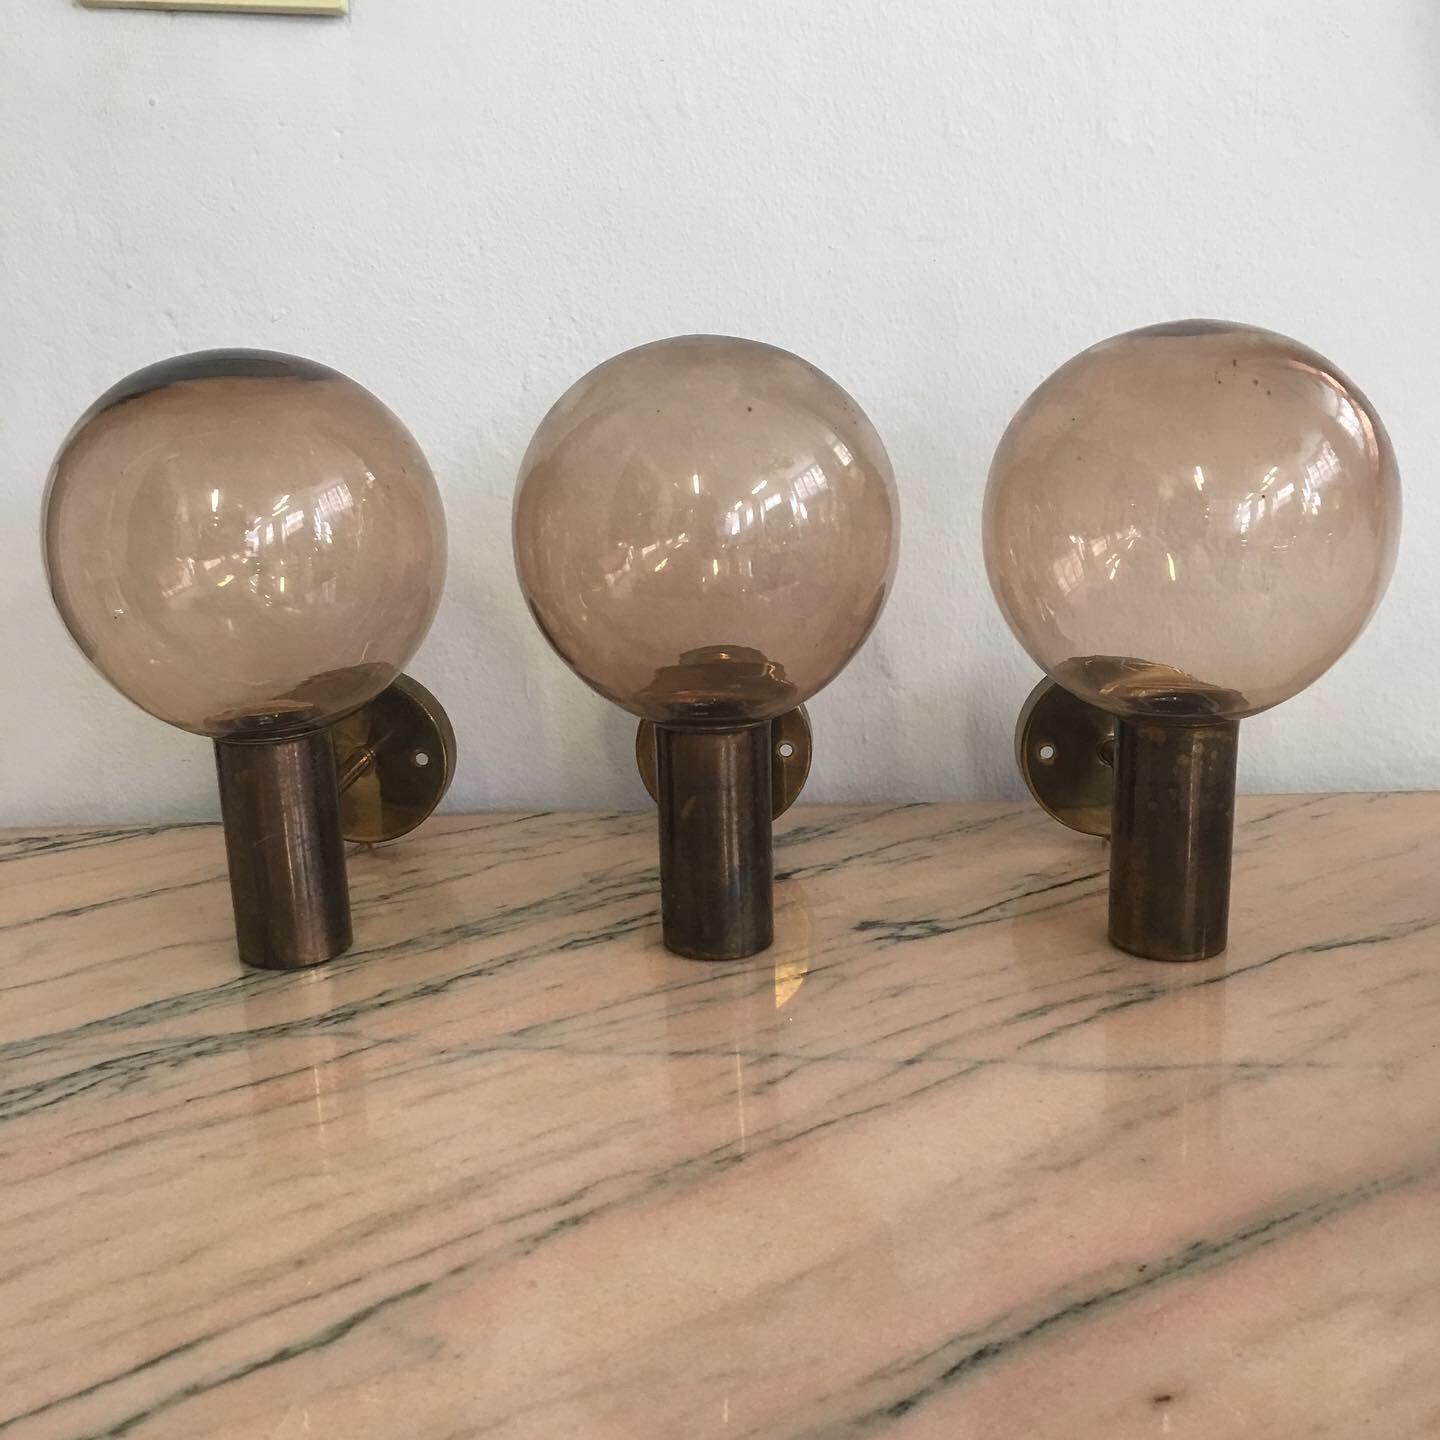 Rare set consisting of three wall lamps, model V-149, with high quality brass frames and fine workmanship holding three fine amber blown glass spheres, designed by Hans-Agne Jakobsson and manufactured by AB Markaryd, from the 1960s.
Each carries the